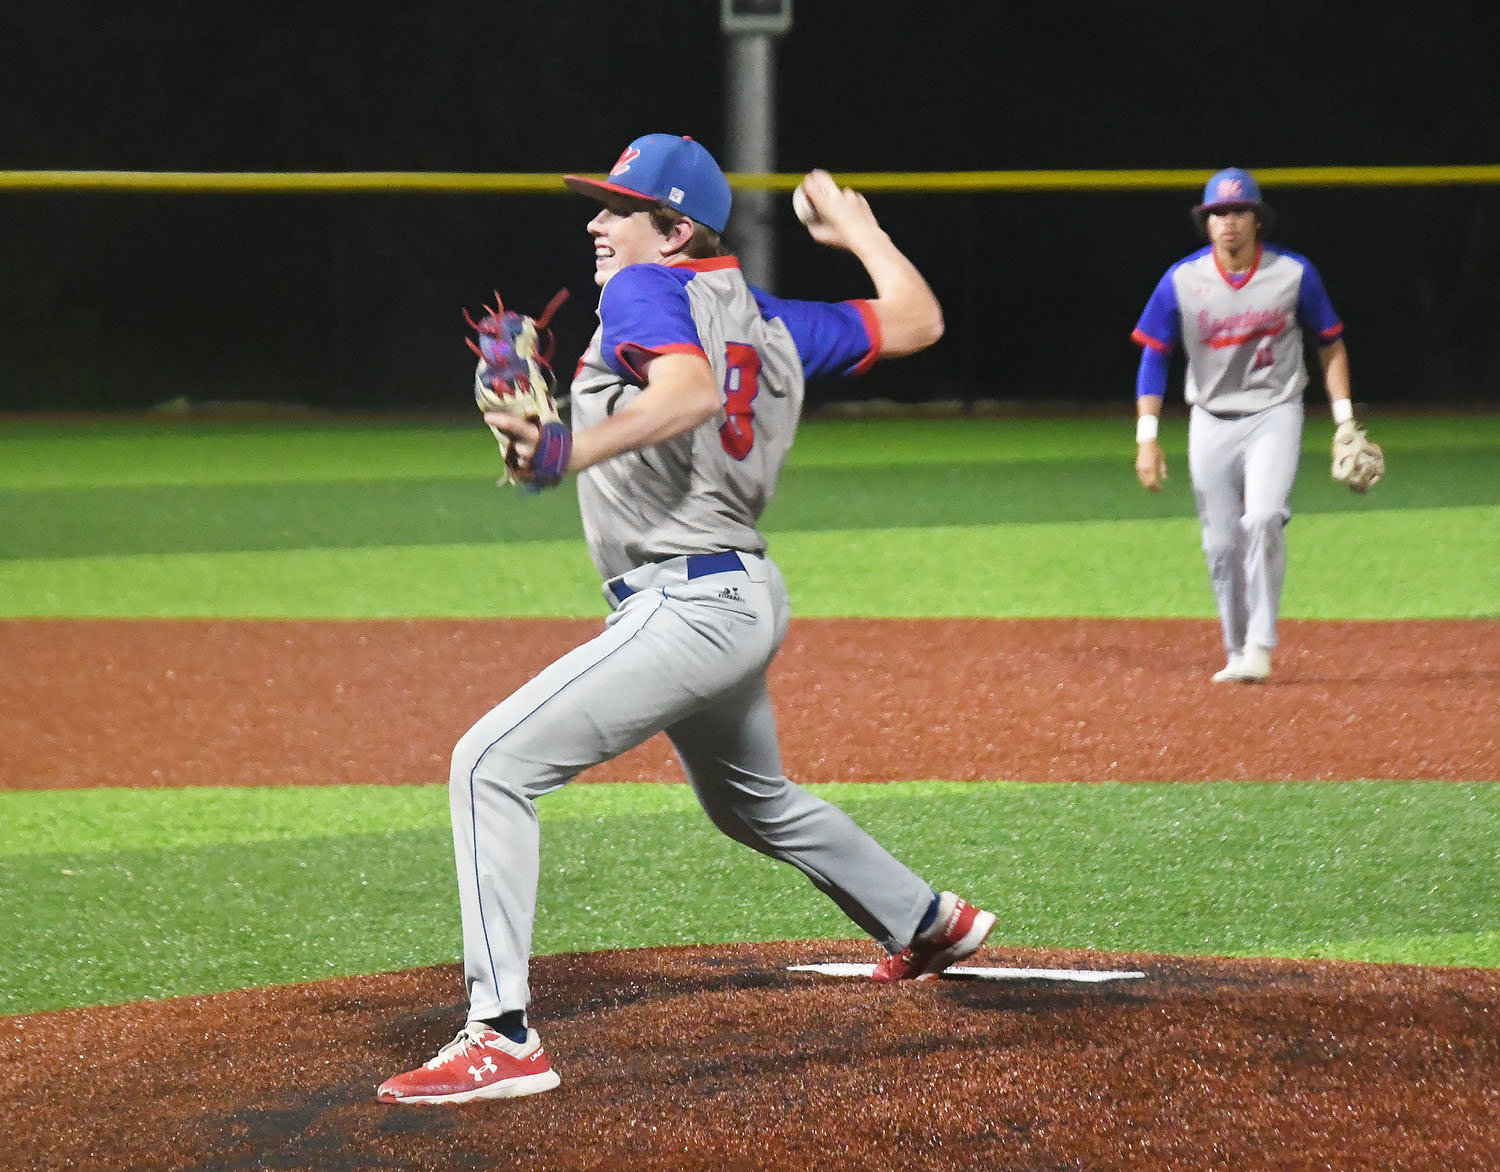 Moberly freshman Jackson Engel pitched the final four innings in Monday's Class 4 District 7 championship game.